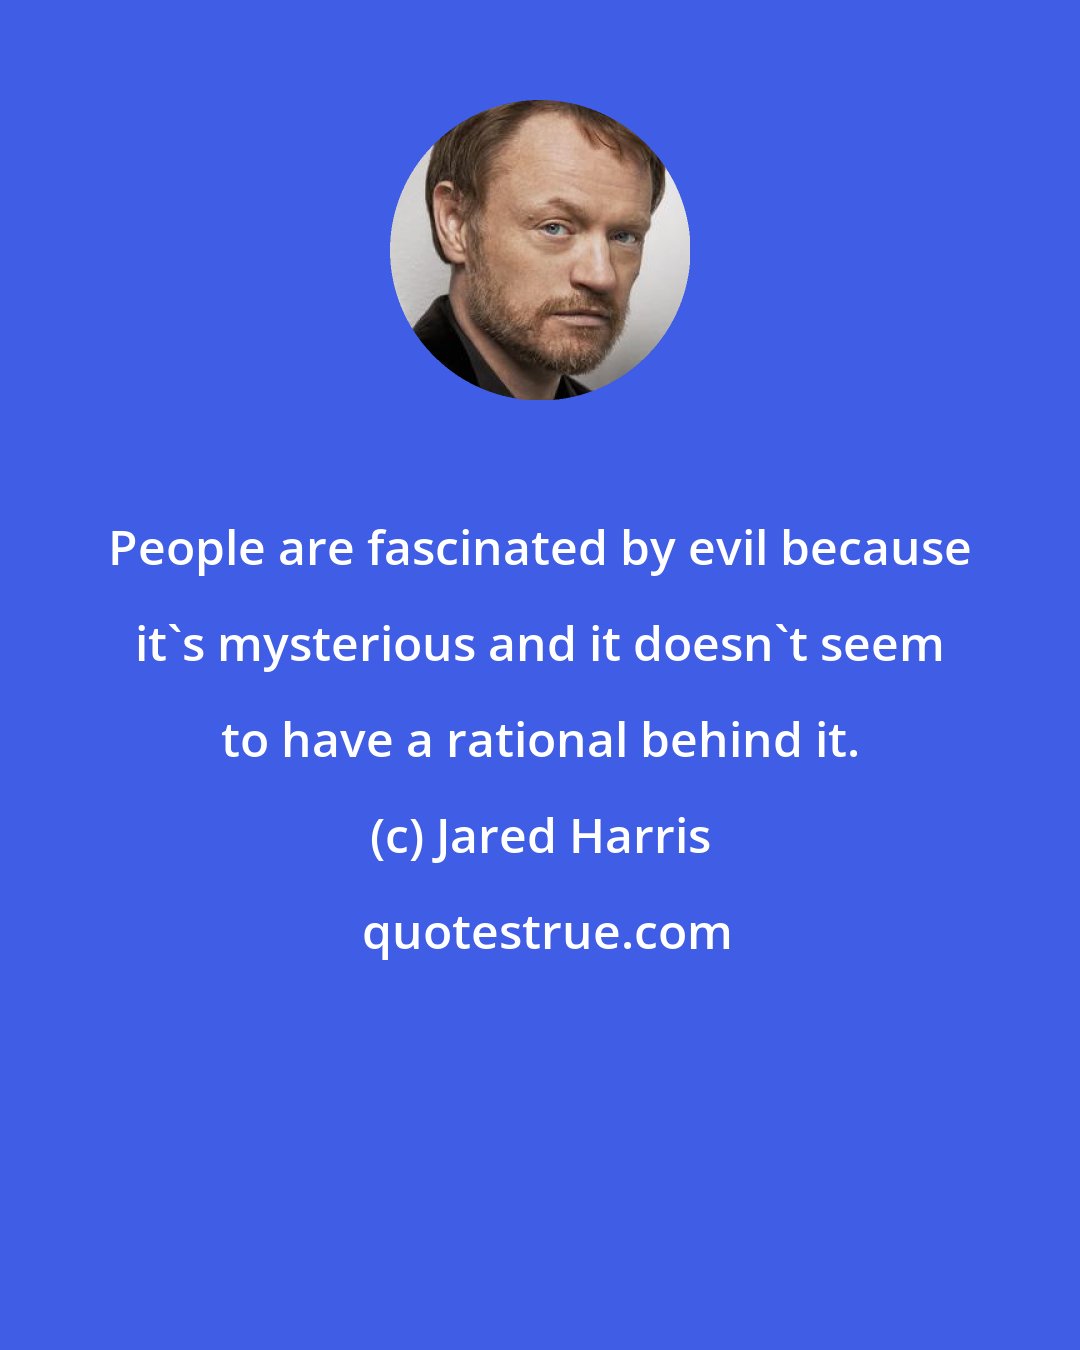 Jared Harris: People are fascinated by evil because it's mysterious and it doesn't seem to have a rational behind it.